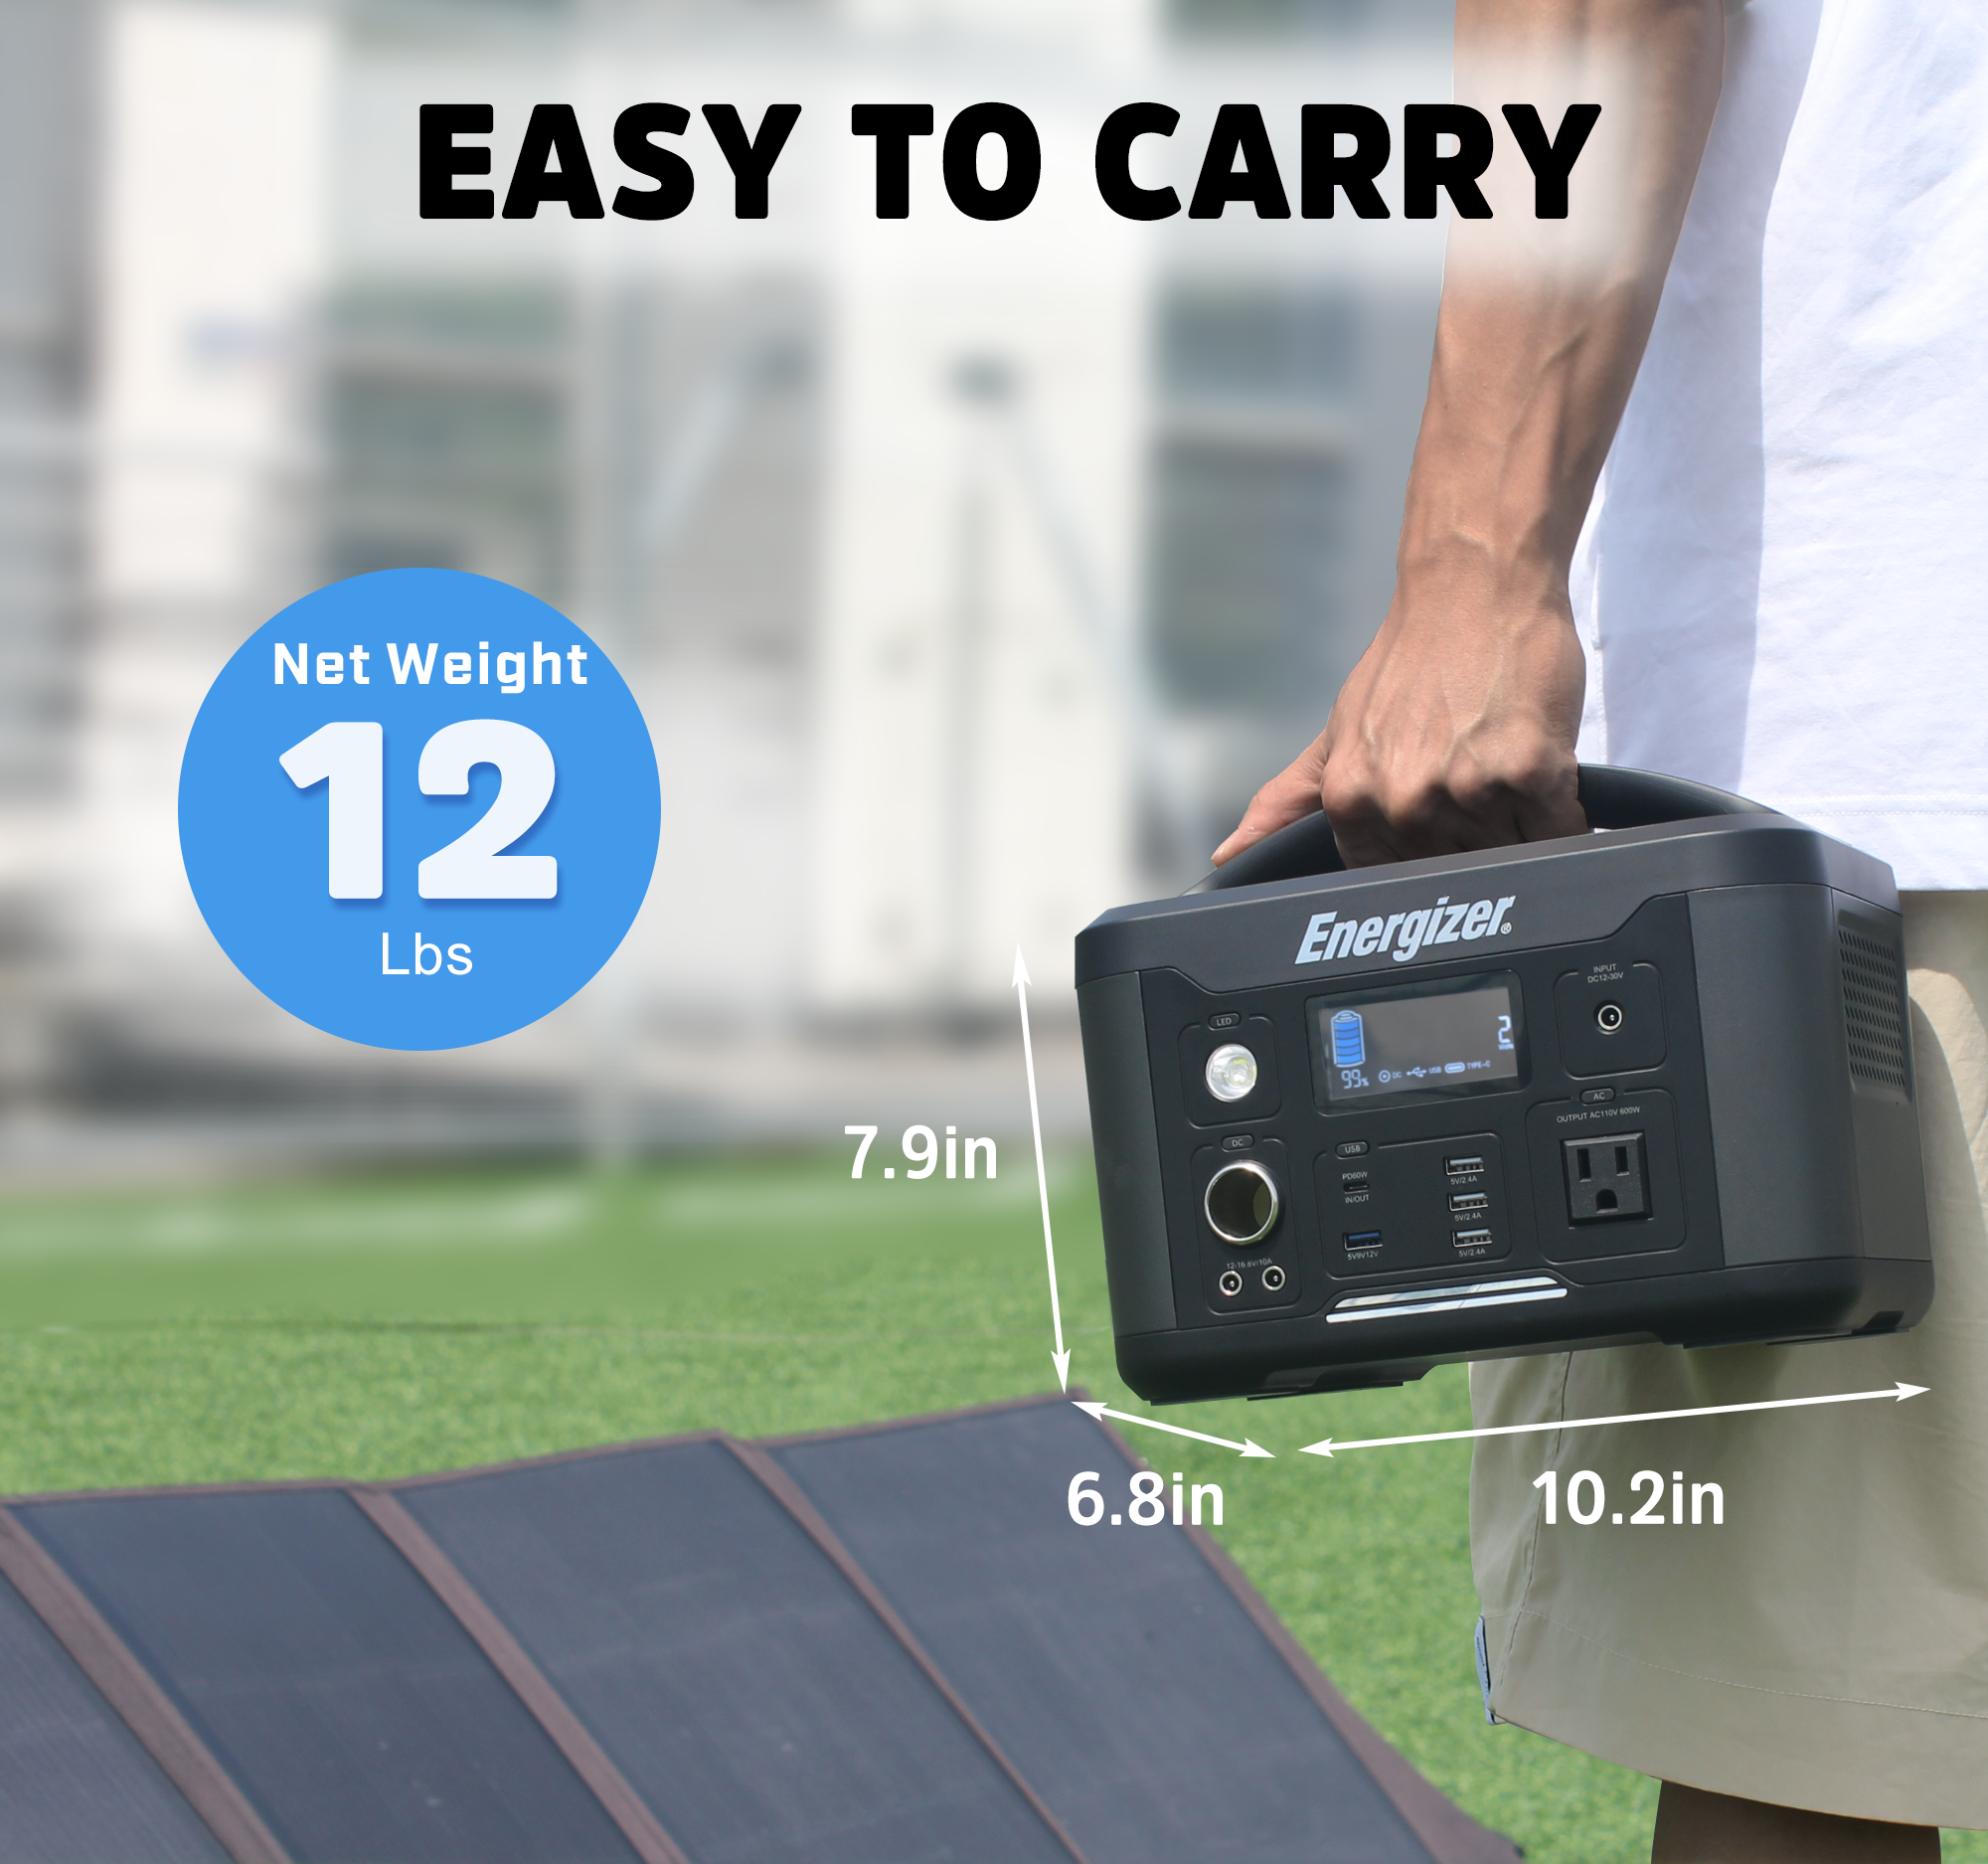 [Not Allowed to Sell on Amazon] PPS700 626Wh Li-ion Solar Generator Portable Power Station PD60W Fast Charging 600W inverter MPPT for Home Use/Outdoors Camping and Emergency